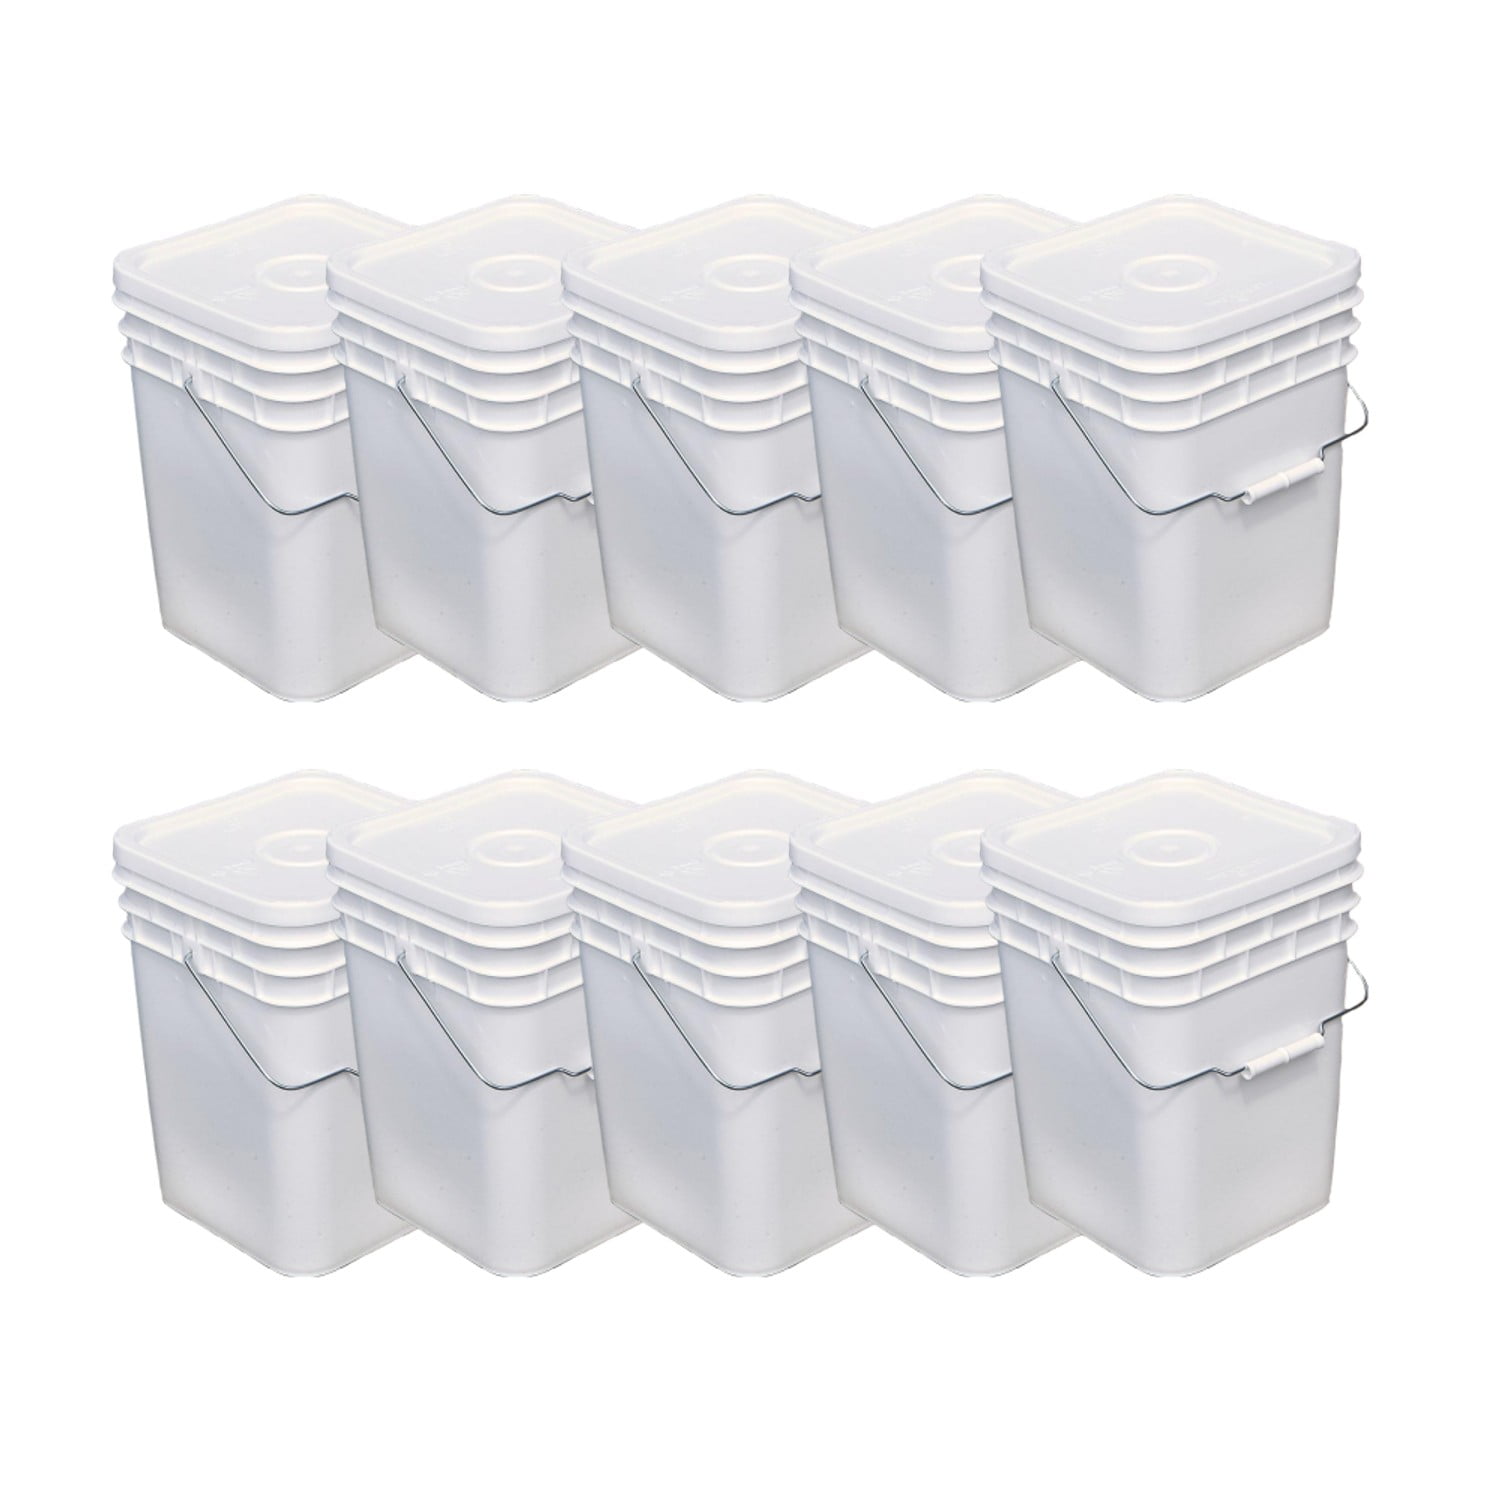 United States Plastic Buckets Tight Fitting Lids Storage 4 Gallon Pack of  10 